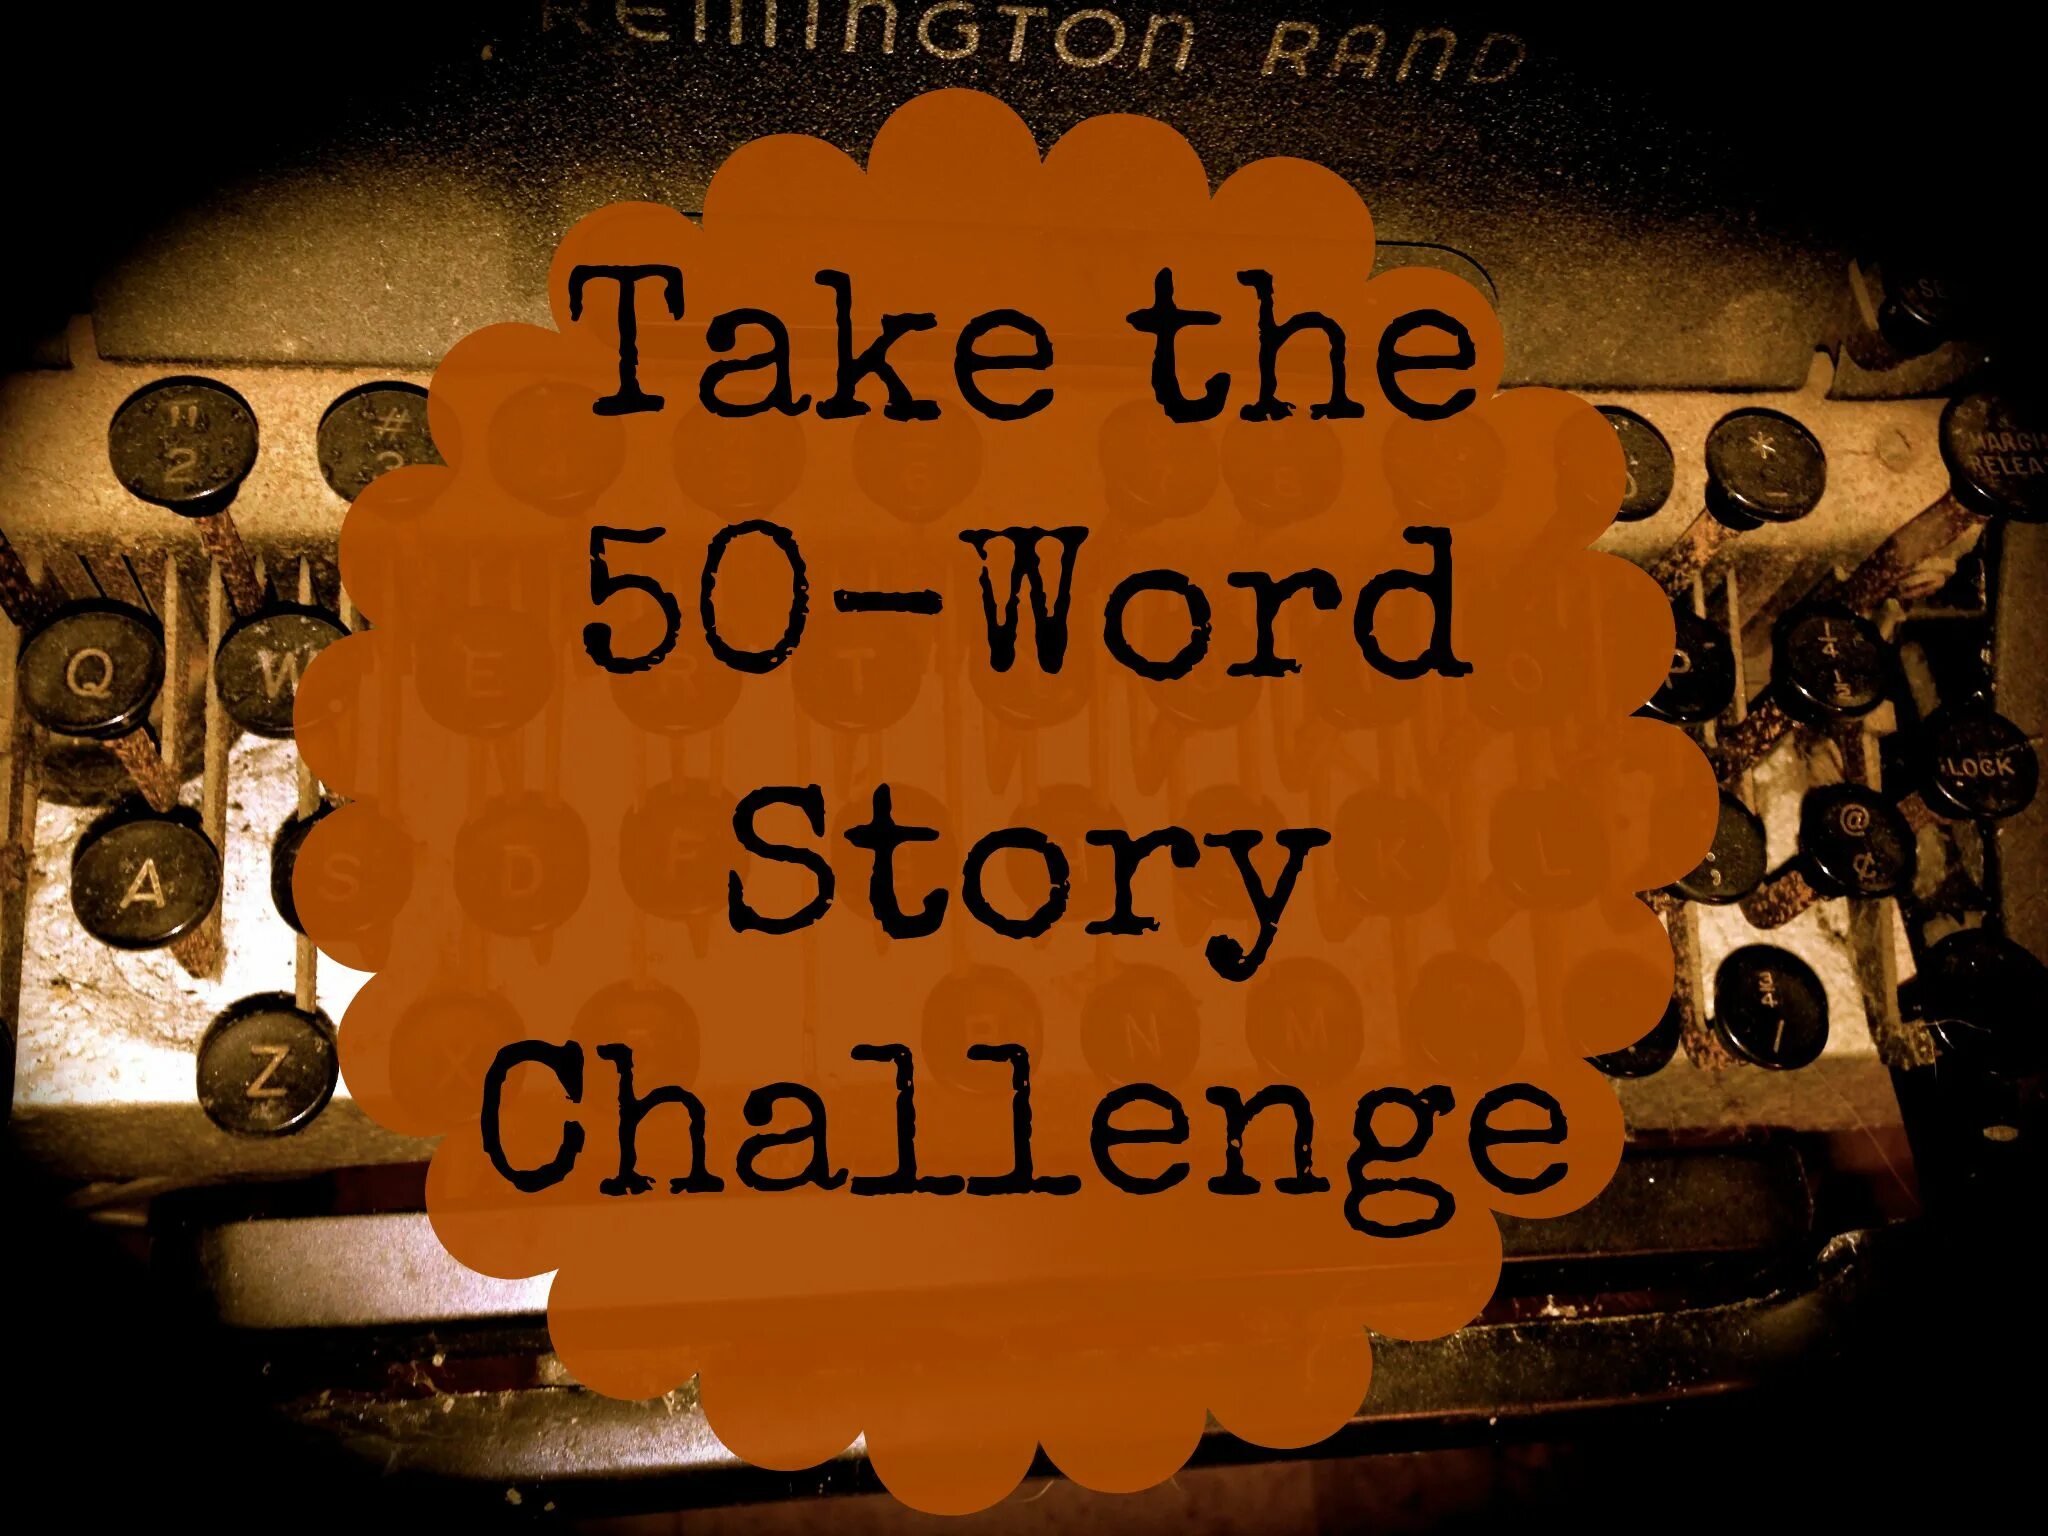 Story Word. 50 Words stories. Stories Challenge. Fifty Word story.